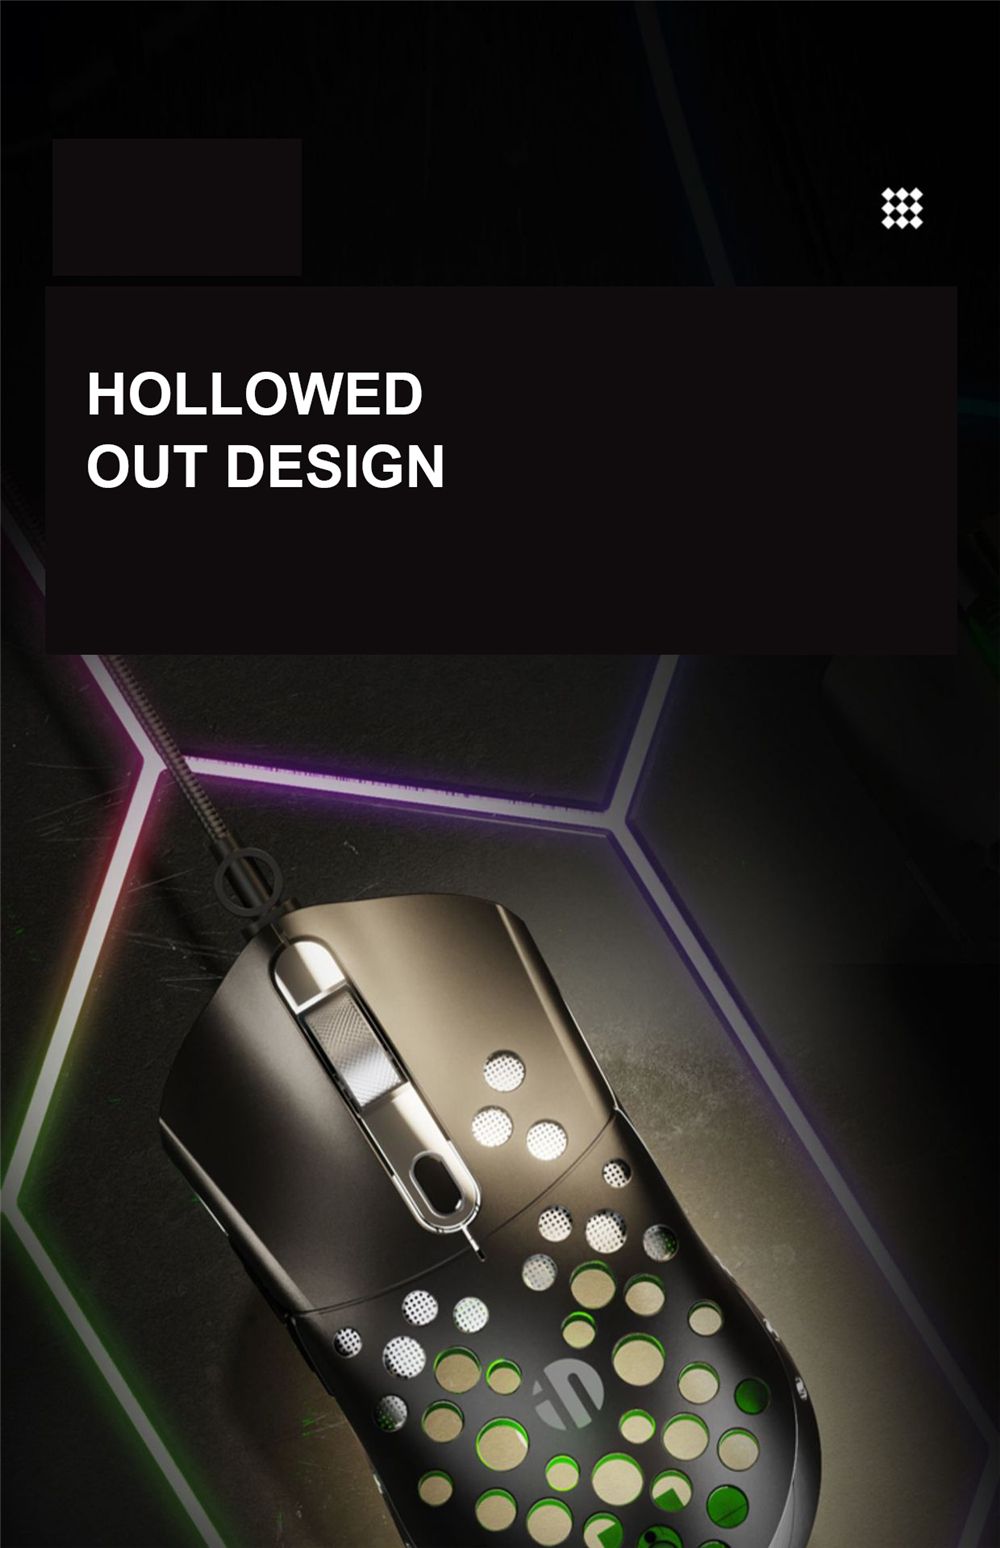 Inphic-IN80-Wired-Lightweight-Hollowed-Mouse-Gaming-E-sport-Mouse-Luminous-RGB-for-Pro-Gamers-and-Of-1735534